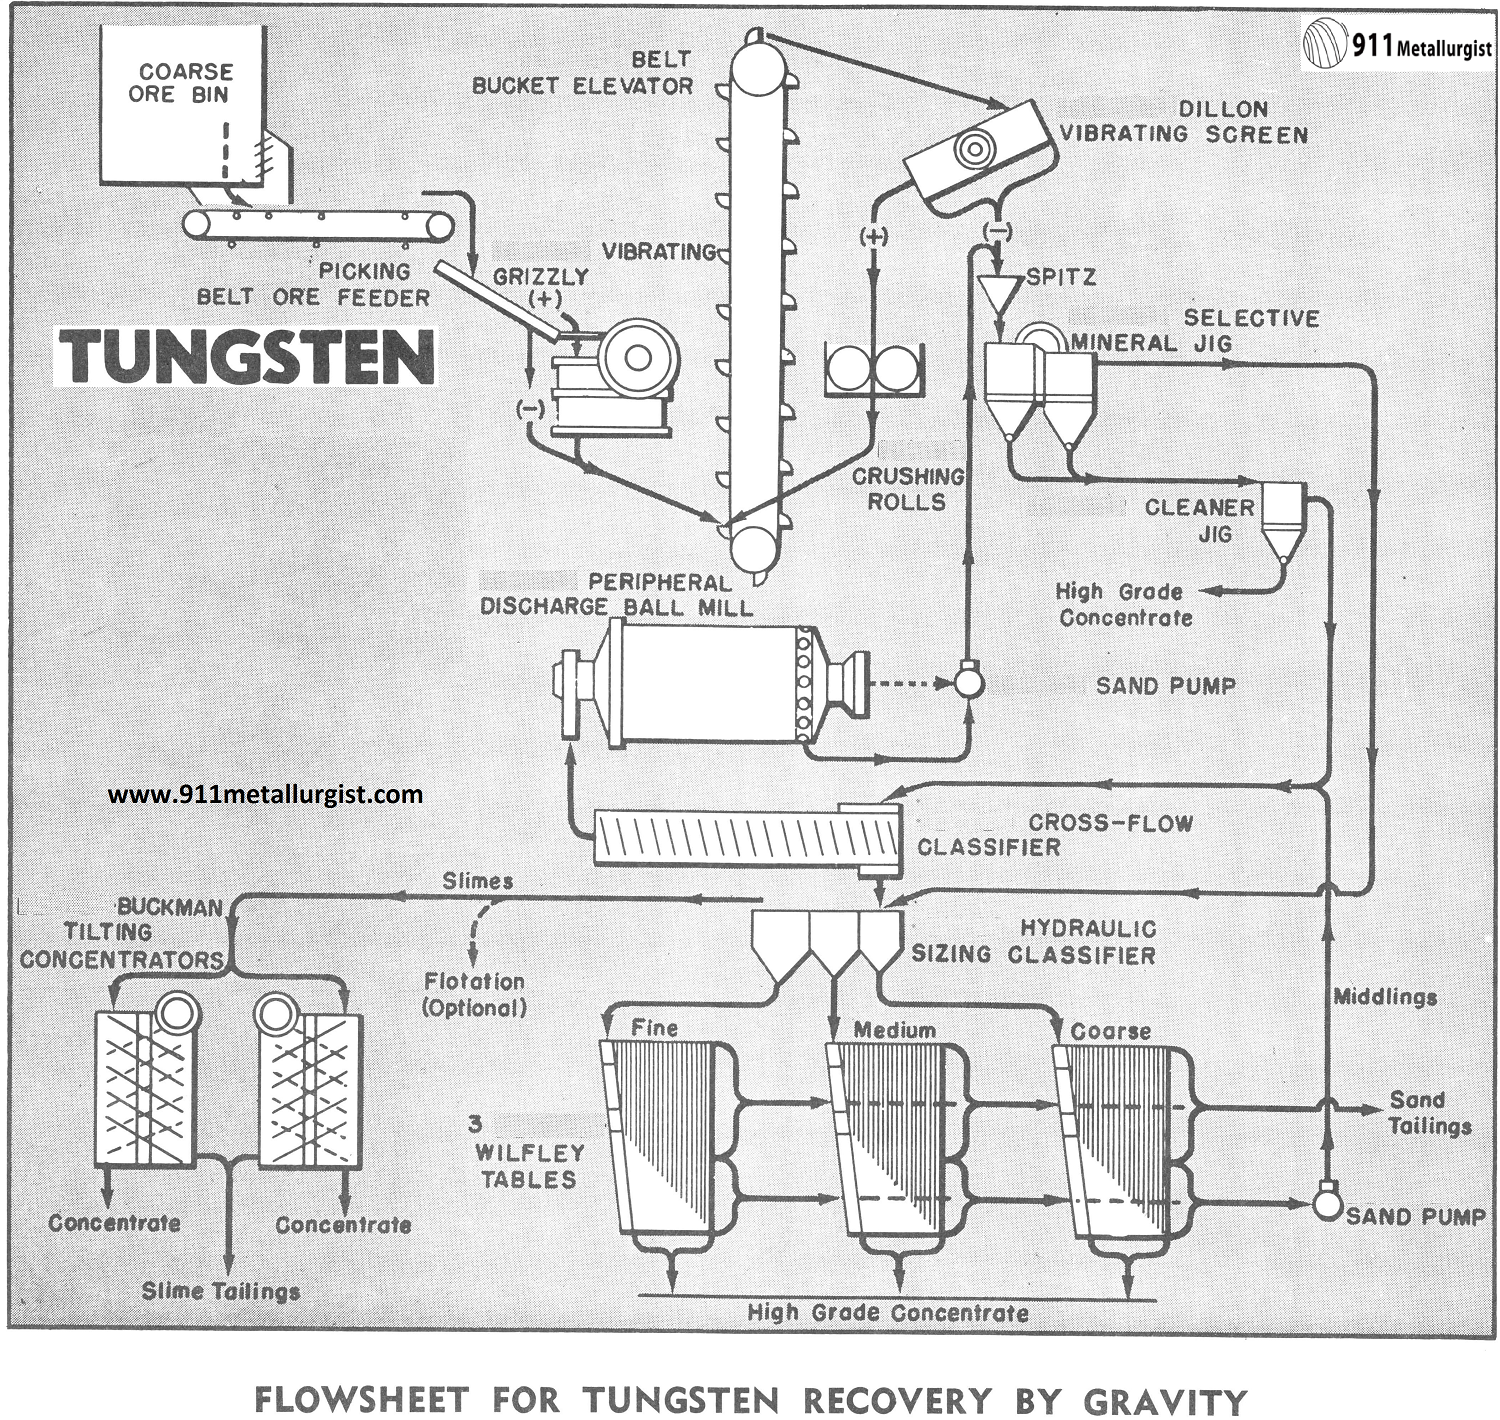  Beneficiation of Tungsten Recovery by Gravity